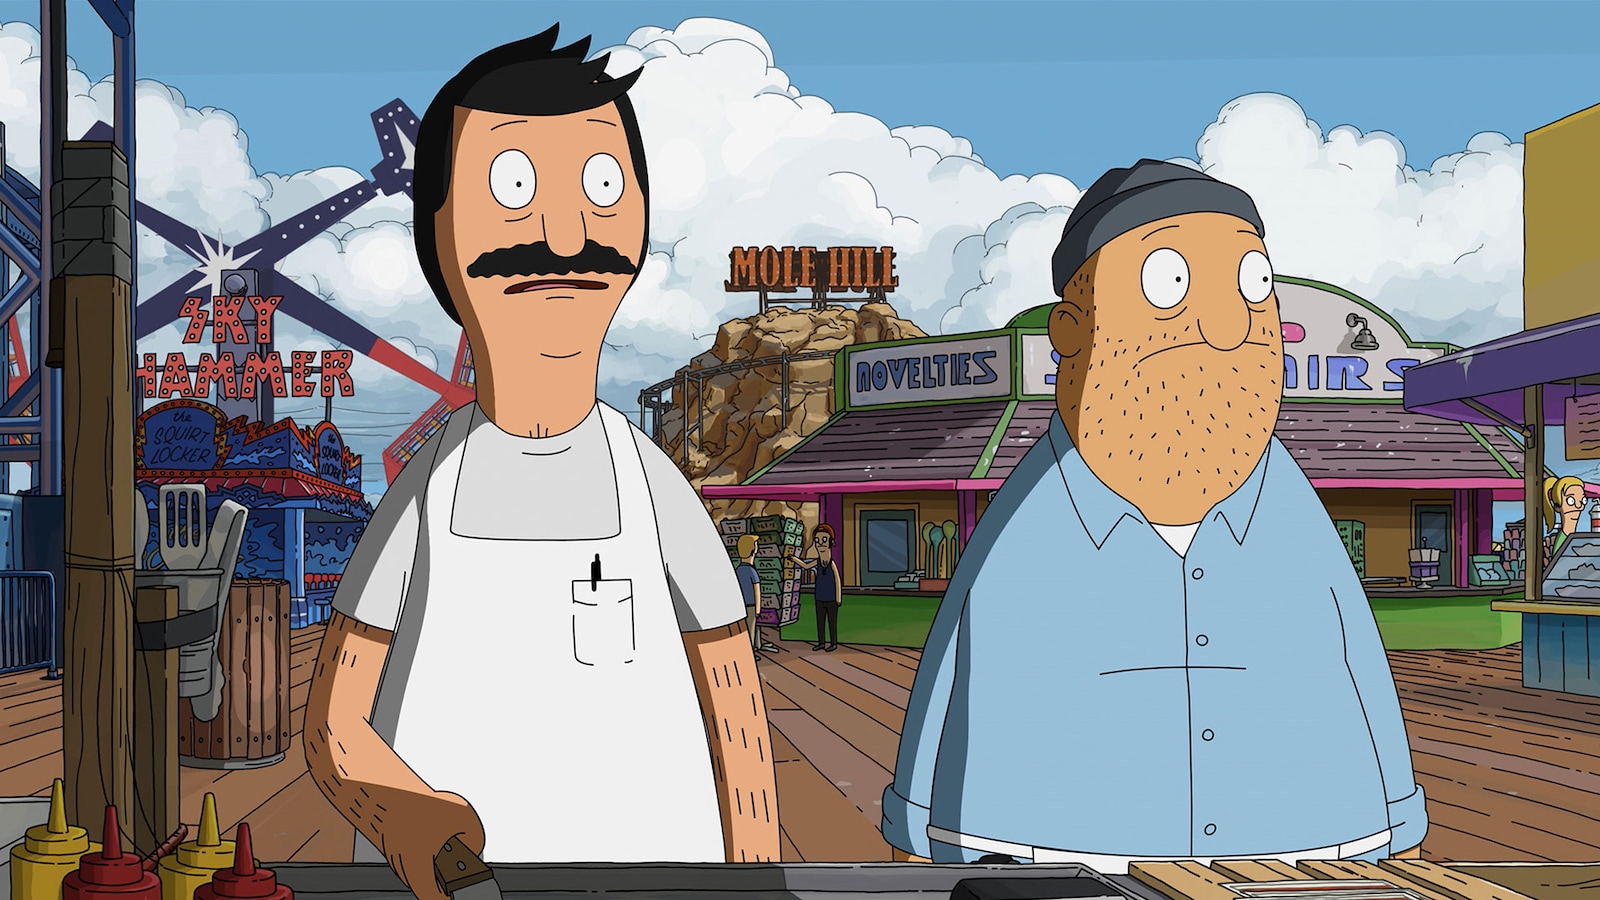 the-bobs-burgers-movie-2022